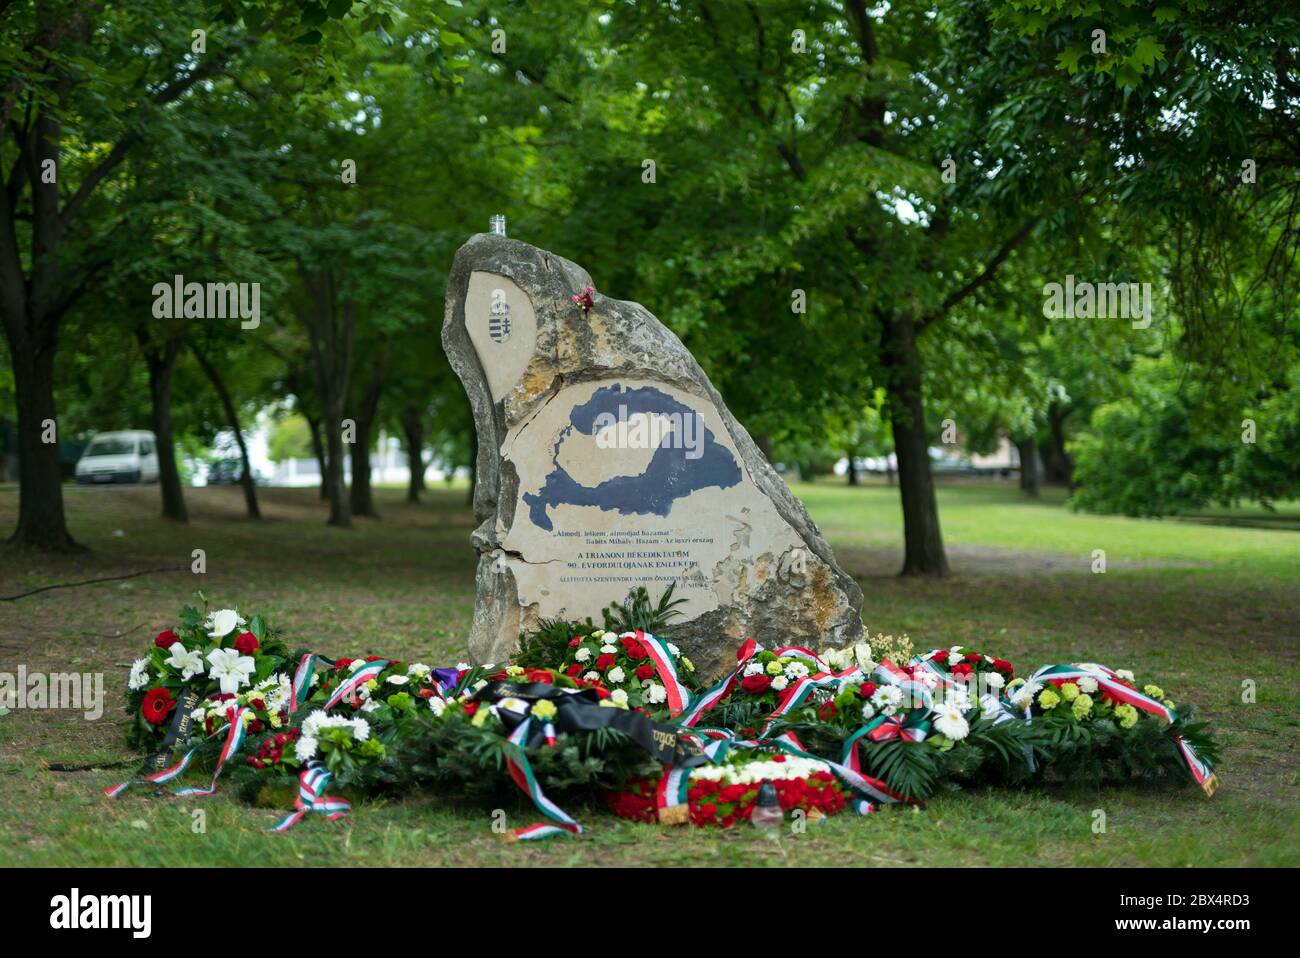 The 100th anniversary of the Treaty of Trianon in Hungary. Stock Photo